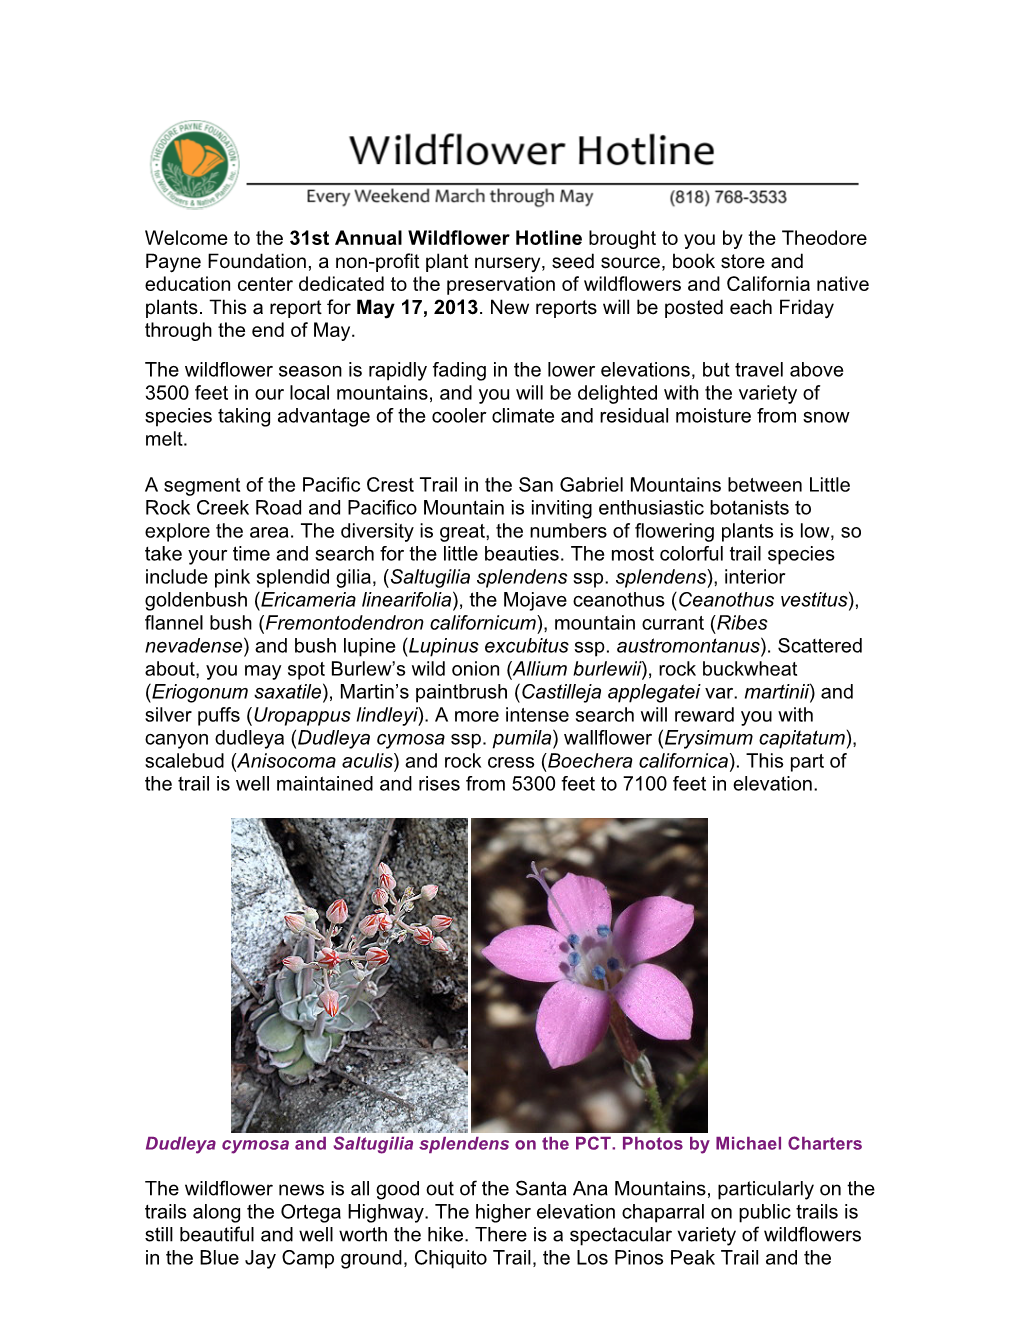 The 31St Annual Wildflower Hotline Brought to You by the Theodore